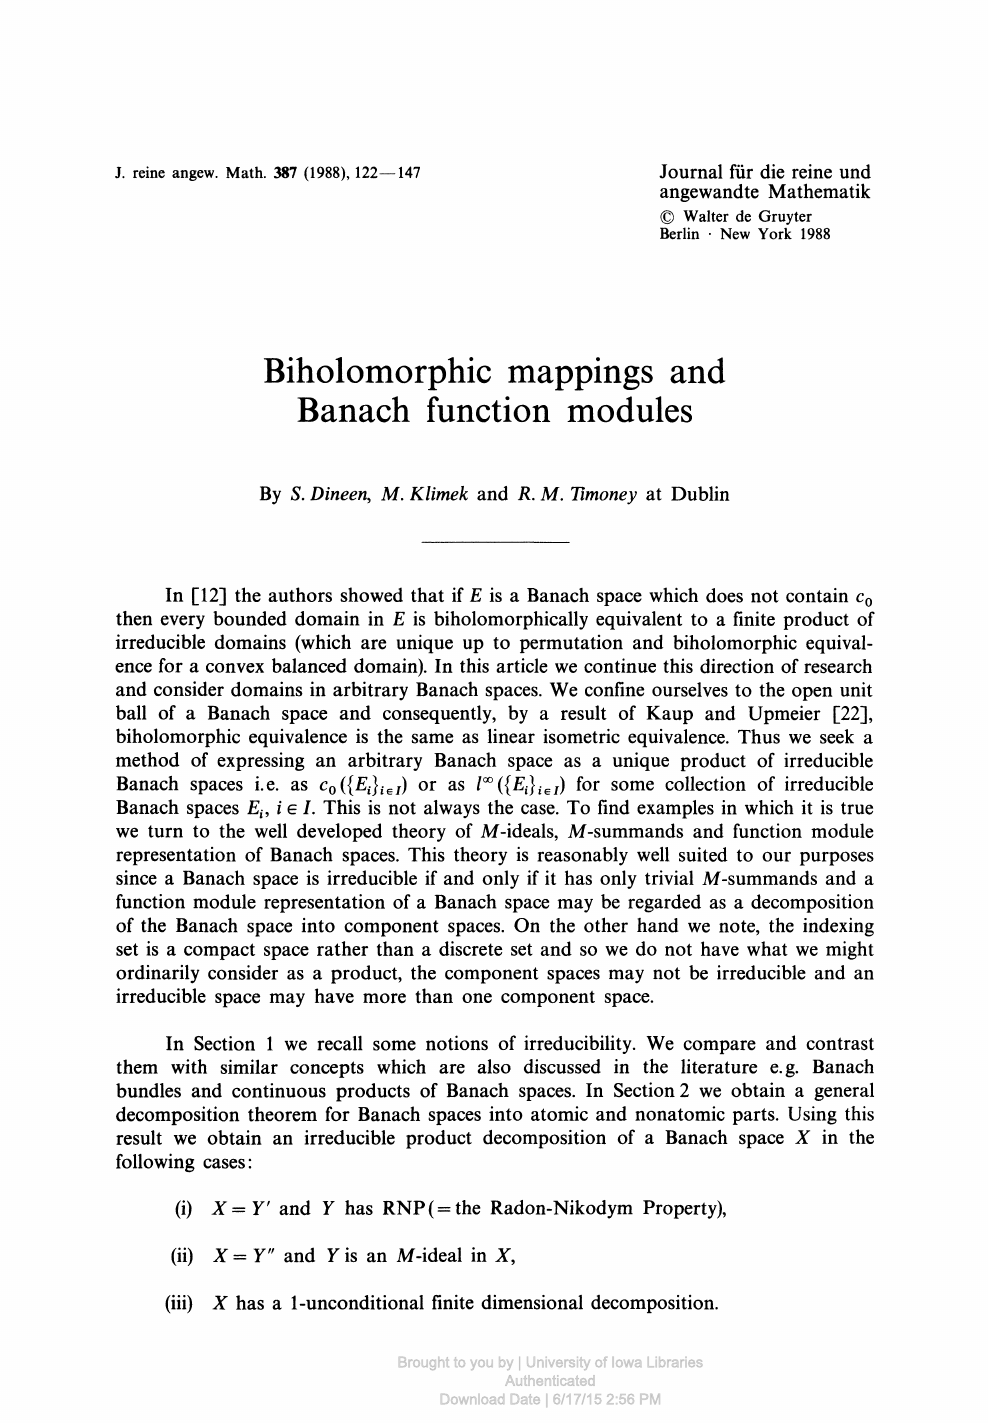 Biholomorphic Mappings And Banach Function Modules Topic Of Research Paper In Mathematics Download Scholarly Article Pdf And Read For Free On Cyberleninka Open Science Hub